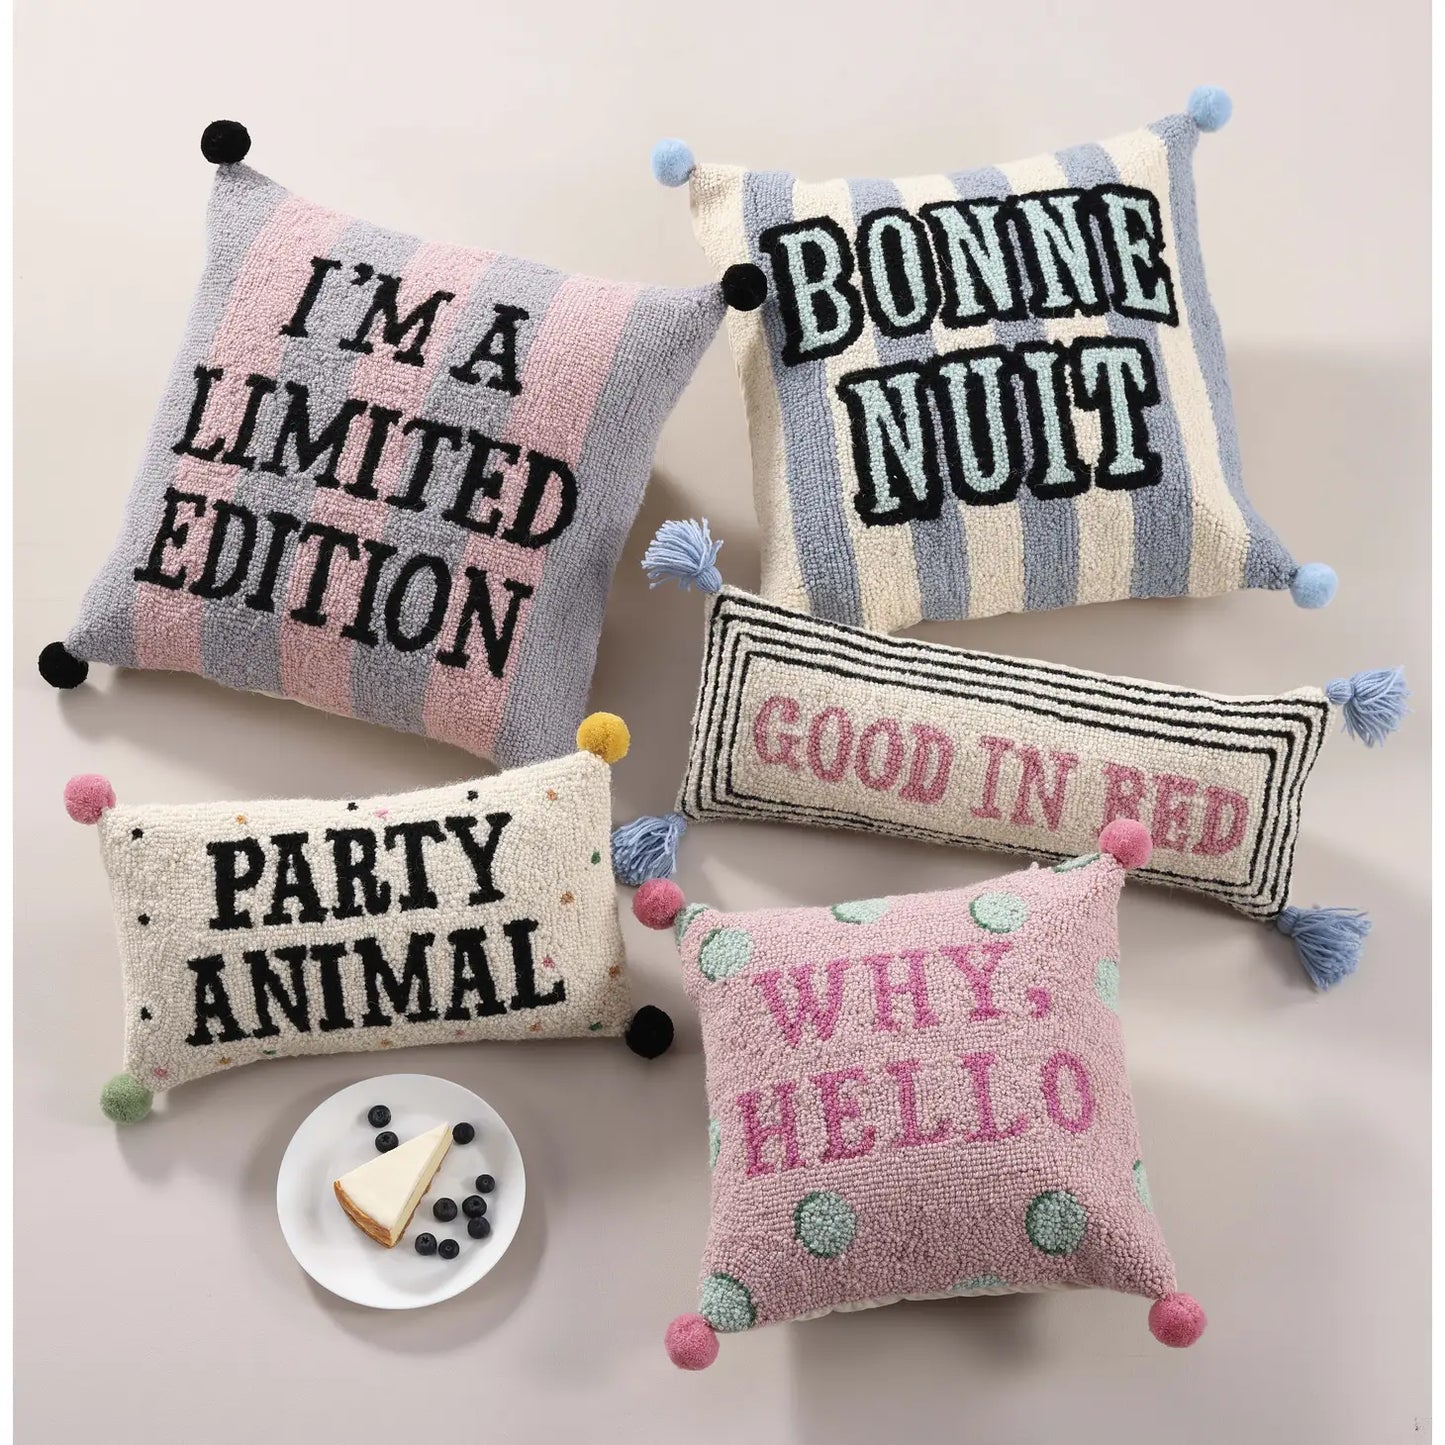 Limited Addition Cushion APRIL PRE ORDER